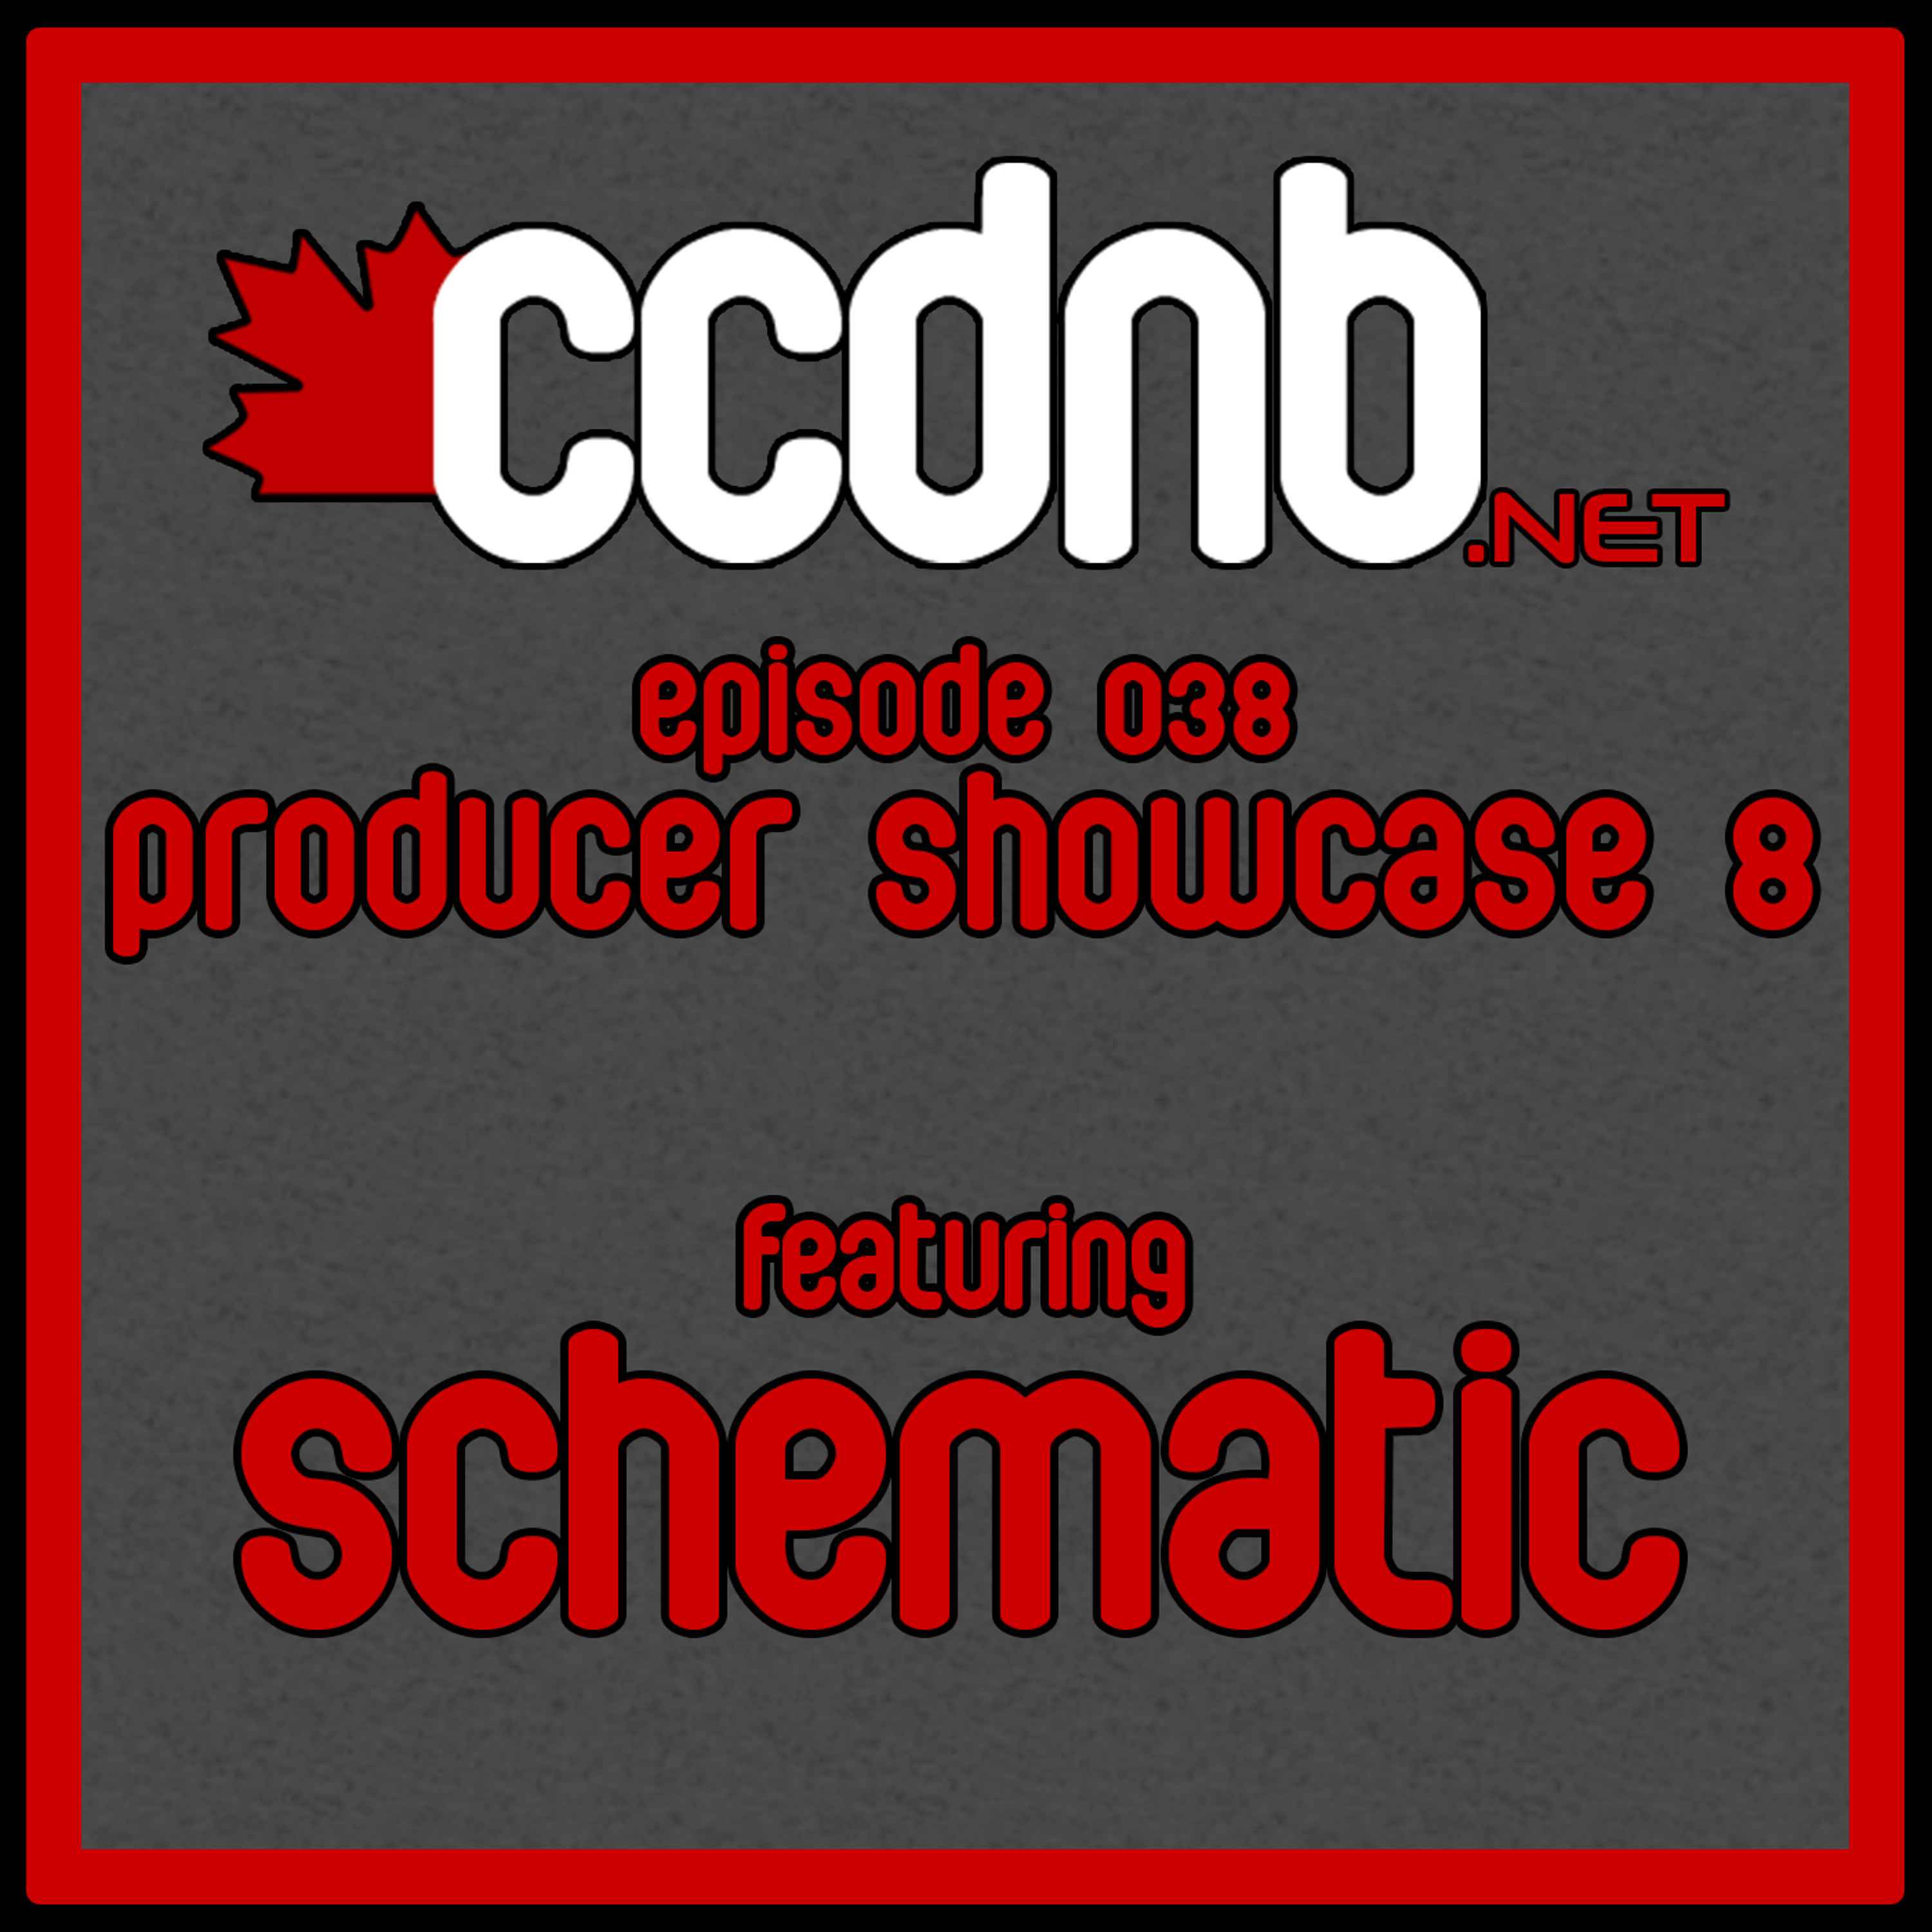 CCDNB 038 Producer Showcase Mix 8 Feat. Schematic